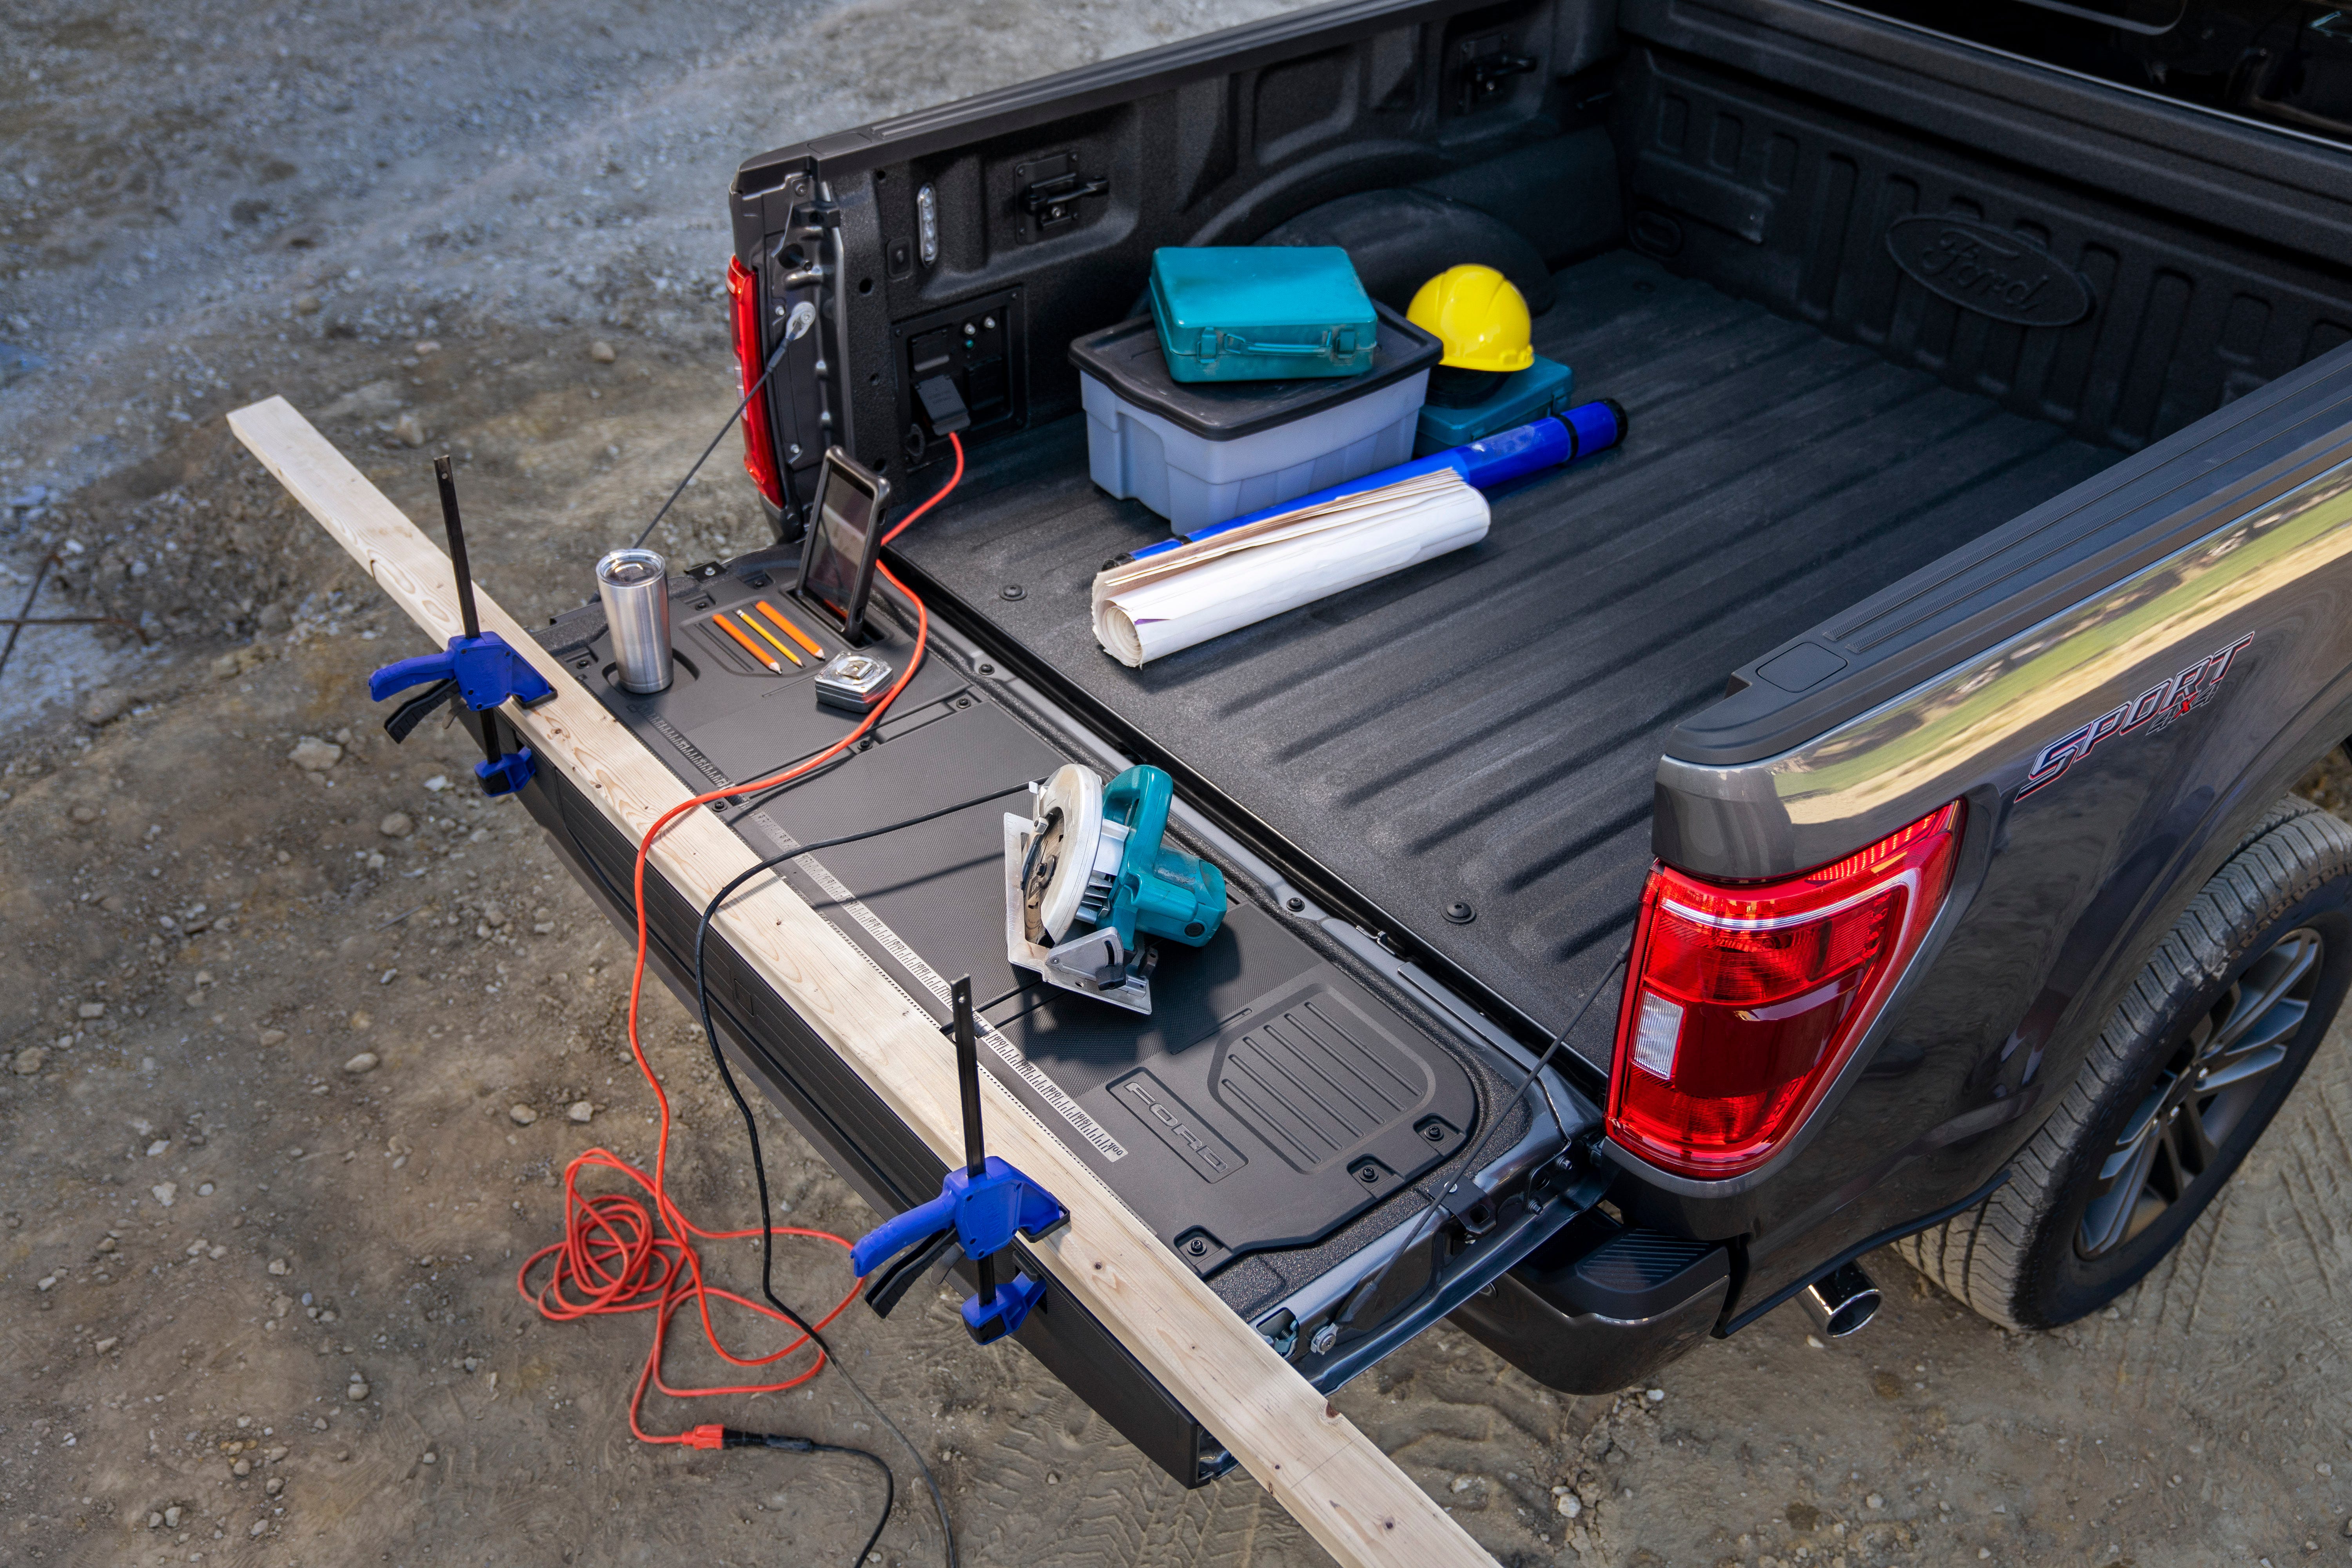 All-new F-150 with available Pro Power Onboard and available Tailgate Work Surface including integrated rulers, a mobile device holder, cupholder and pencil holder.